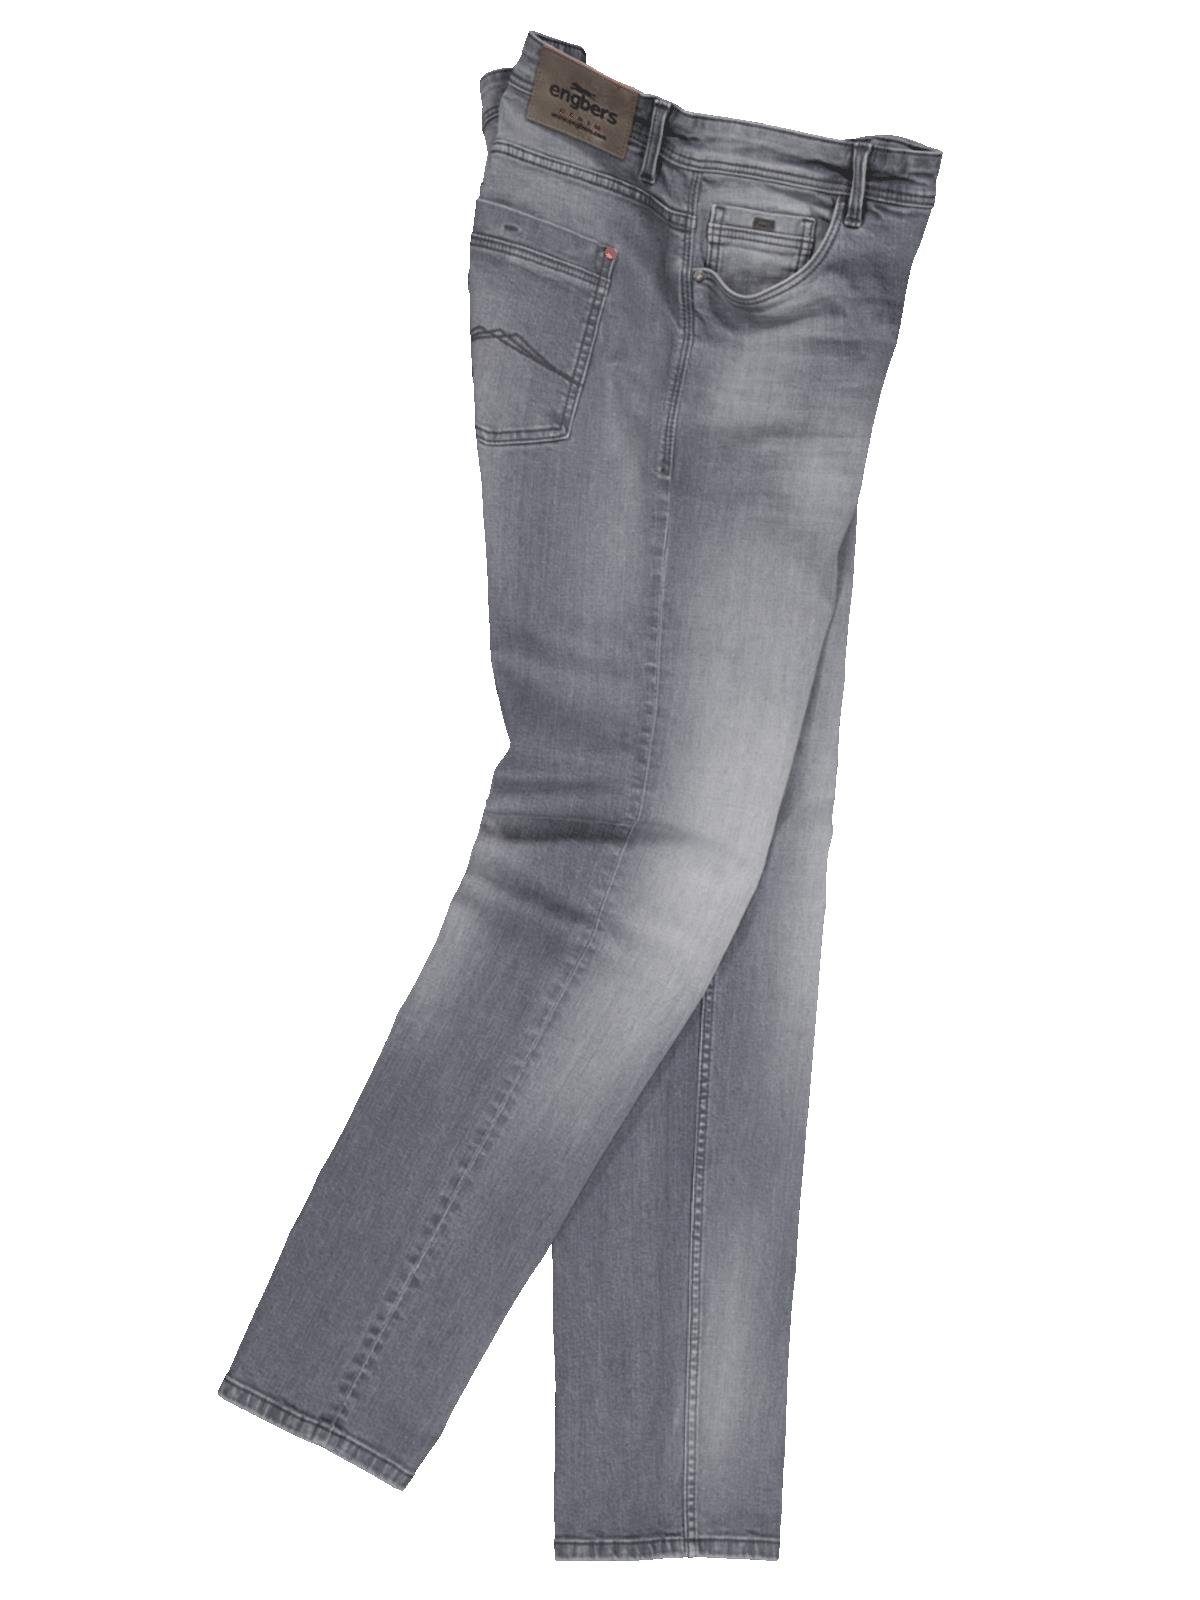 Engbers Jeans slim fit Stretch-Jeans